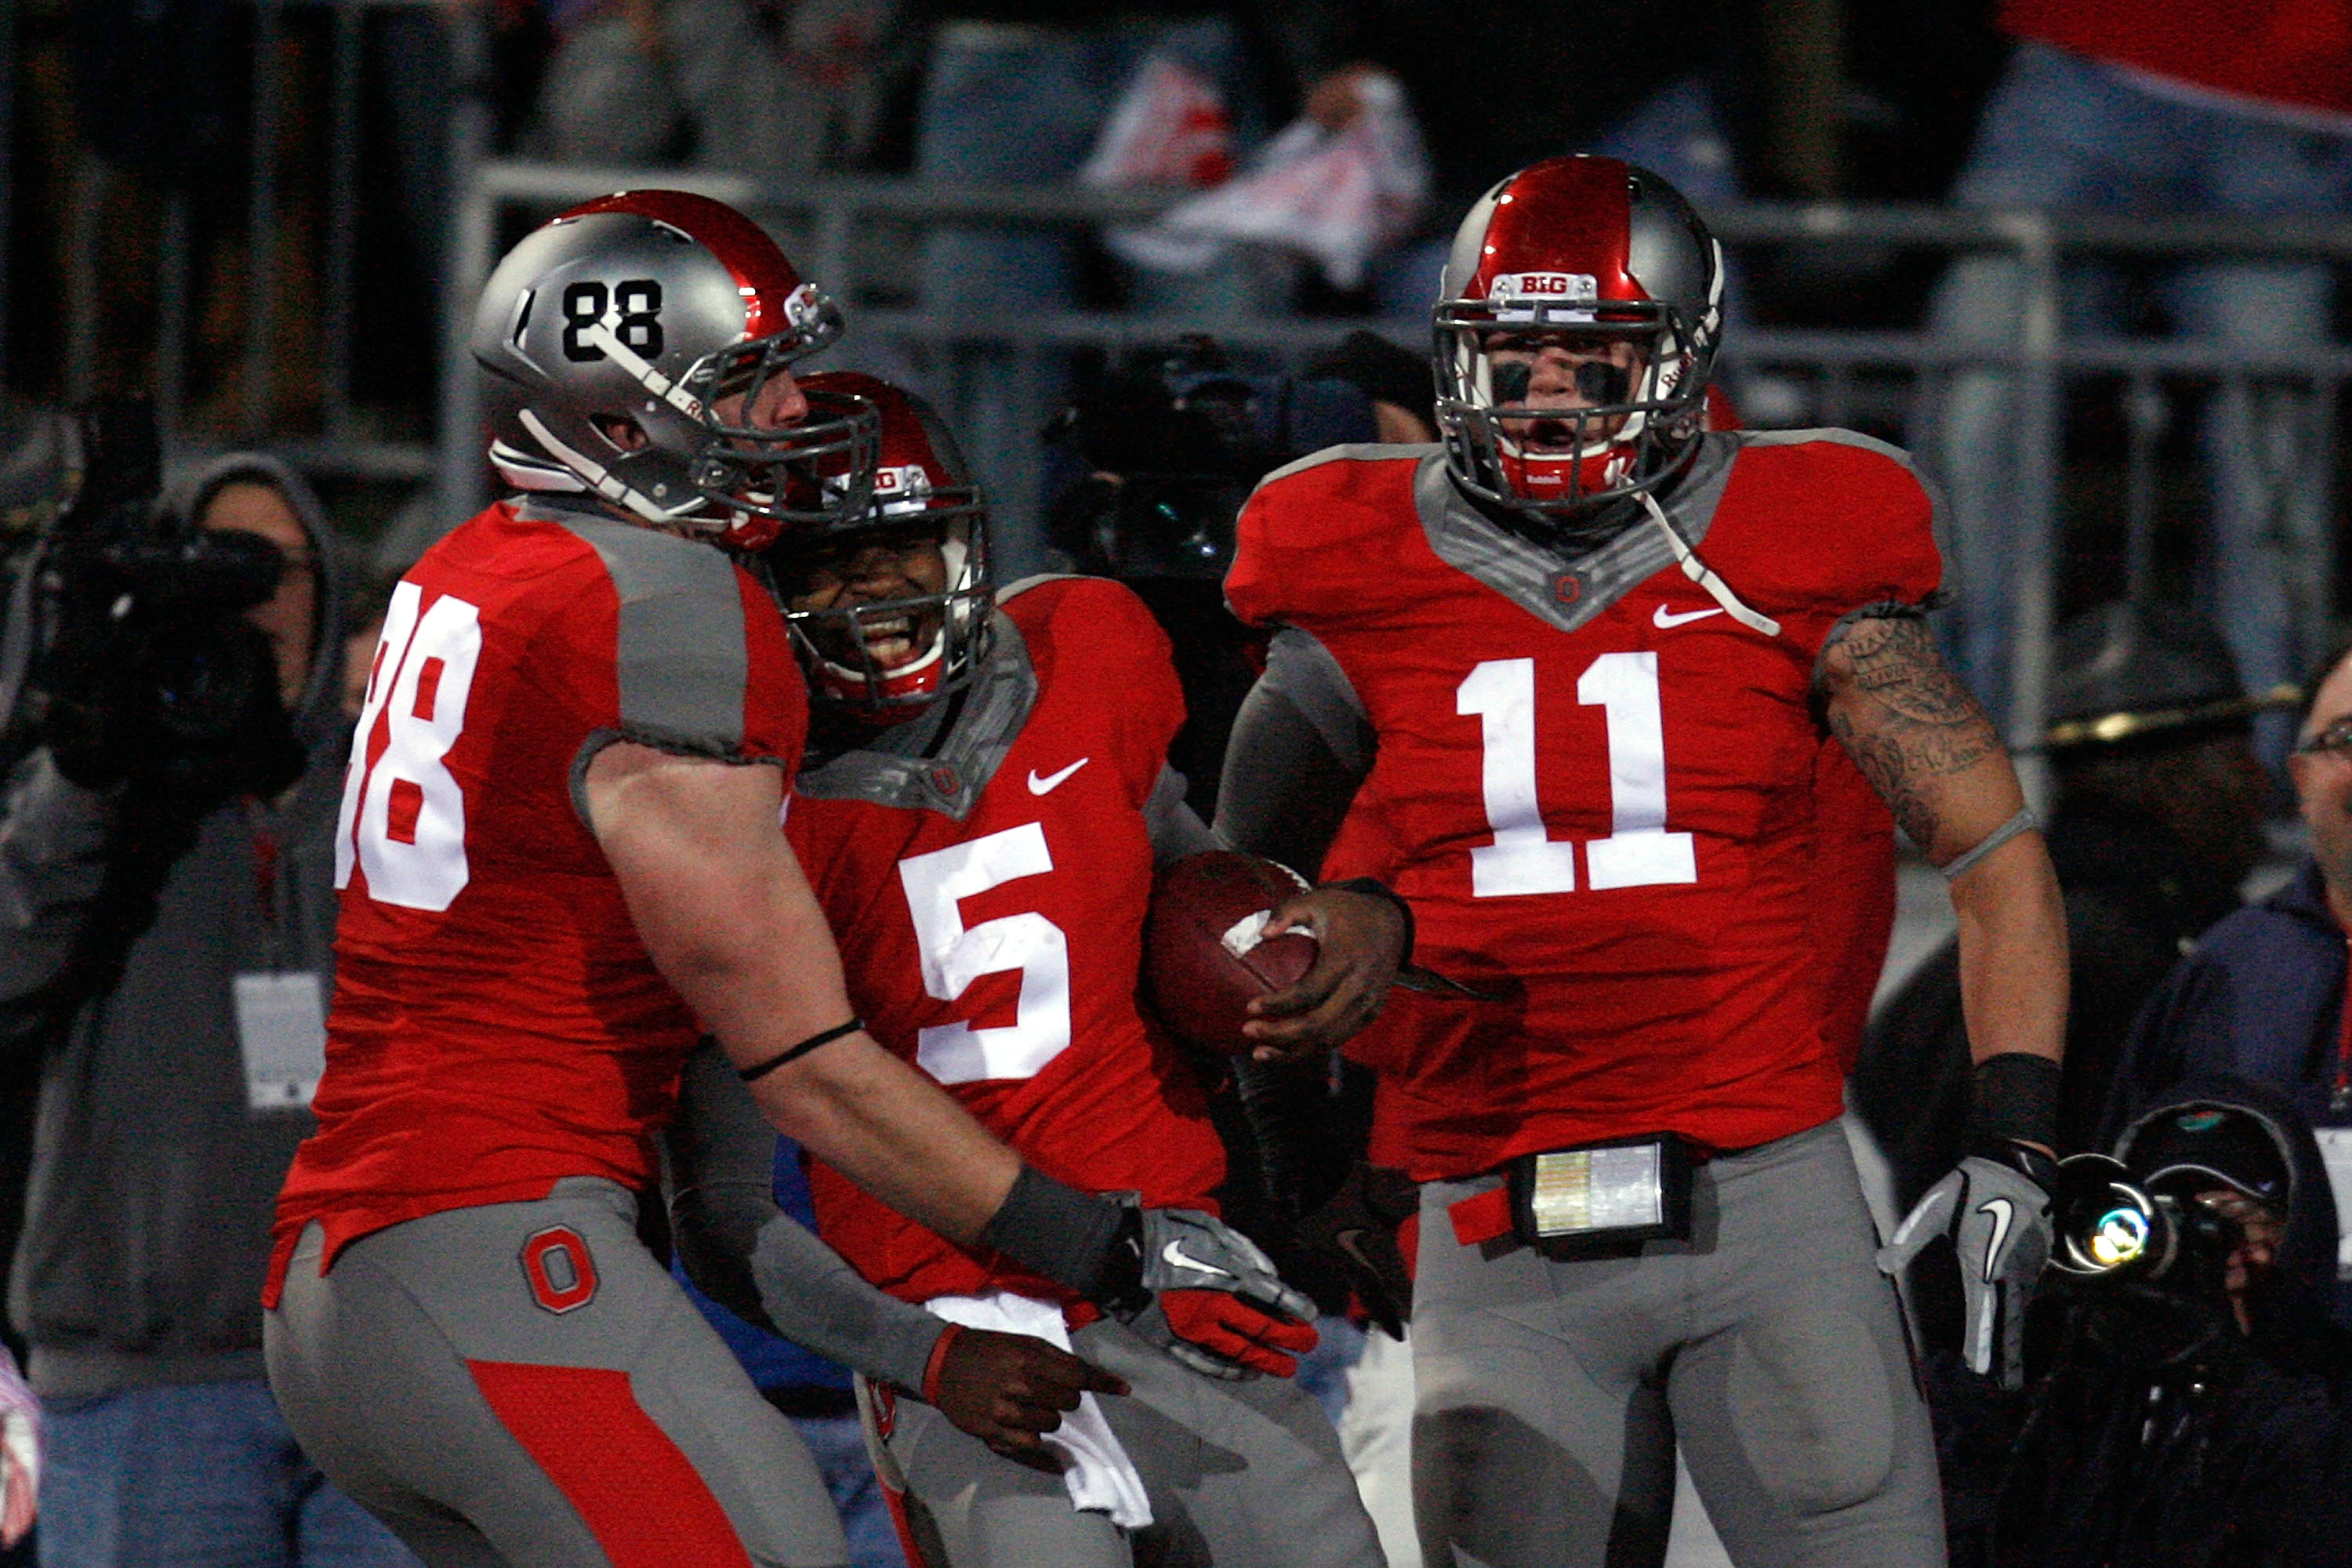 Confirmed: Ohio State to Wear Alternate Jerseys Saturday